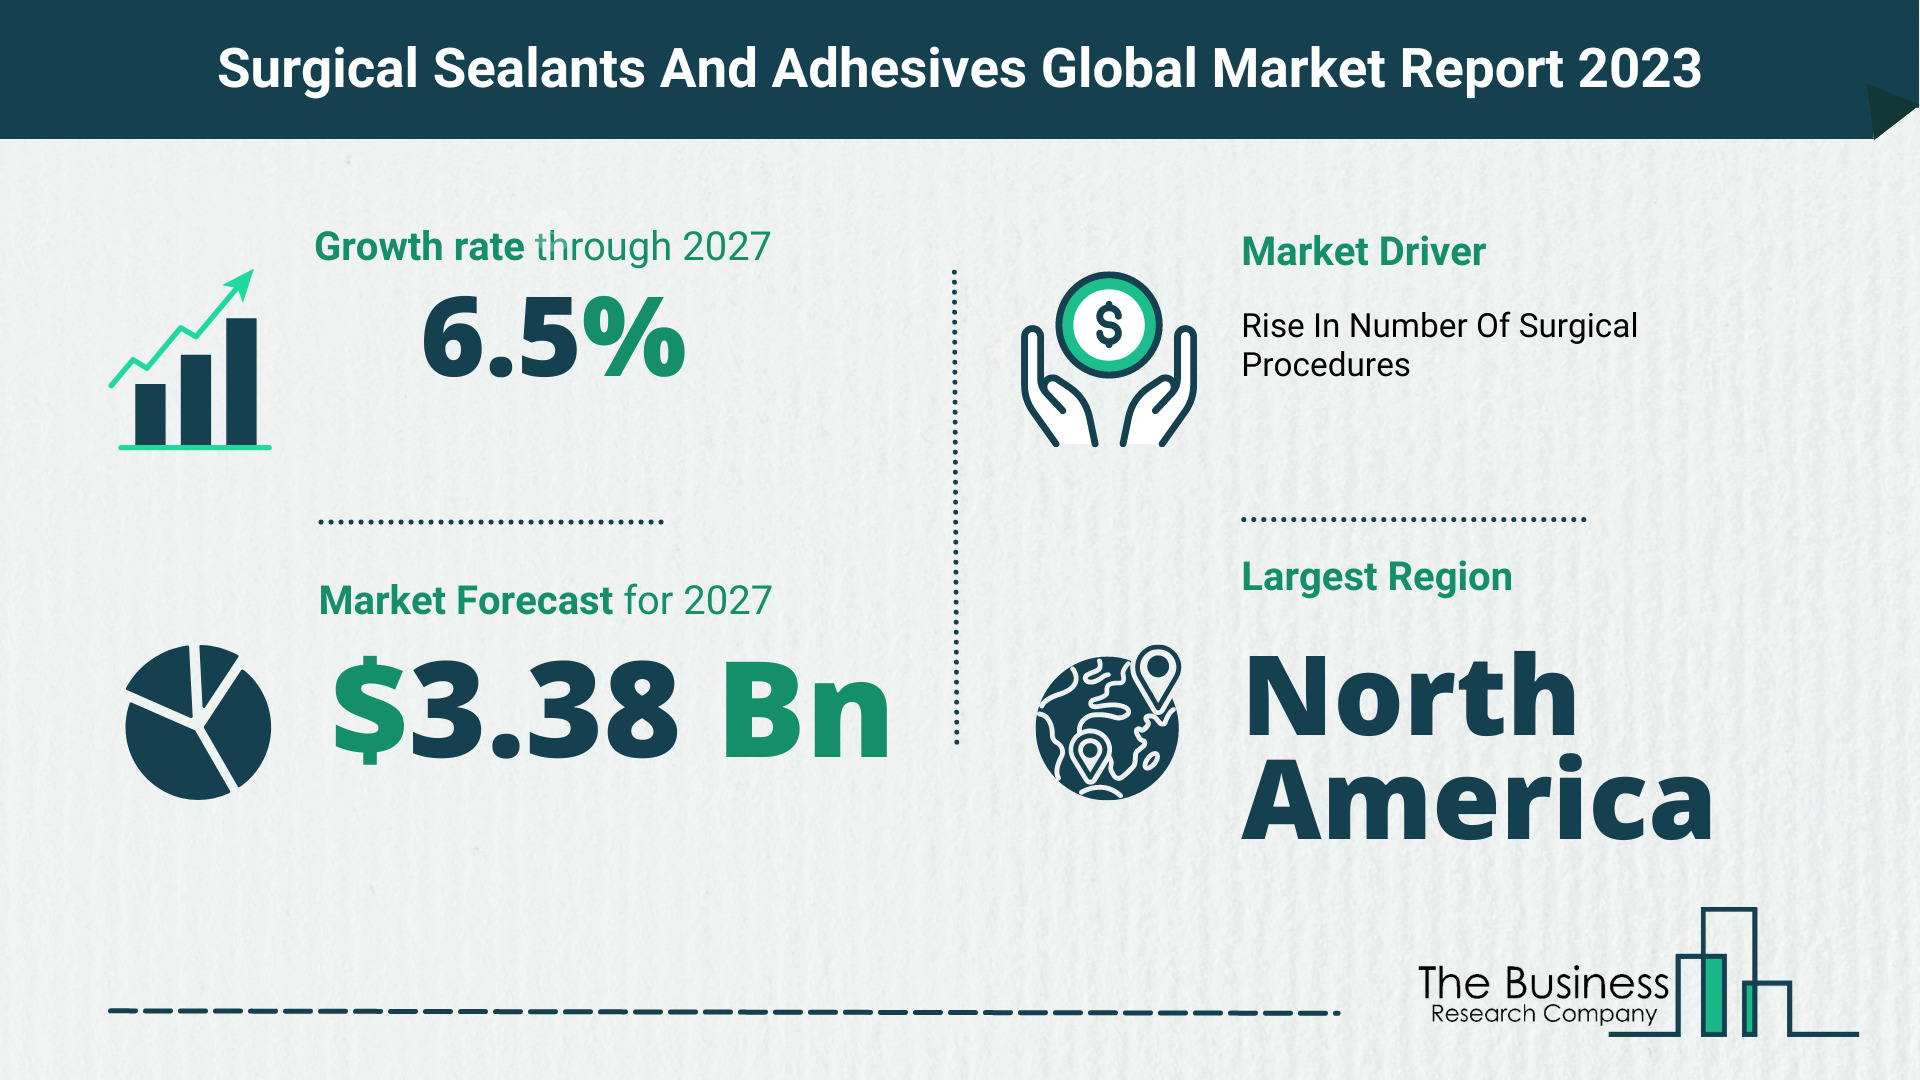 How Will The Surgical Sealants And Adhesives Market Globally Expand In 2023?